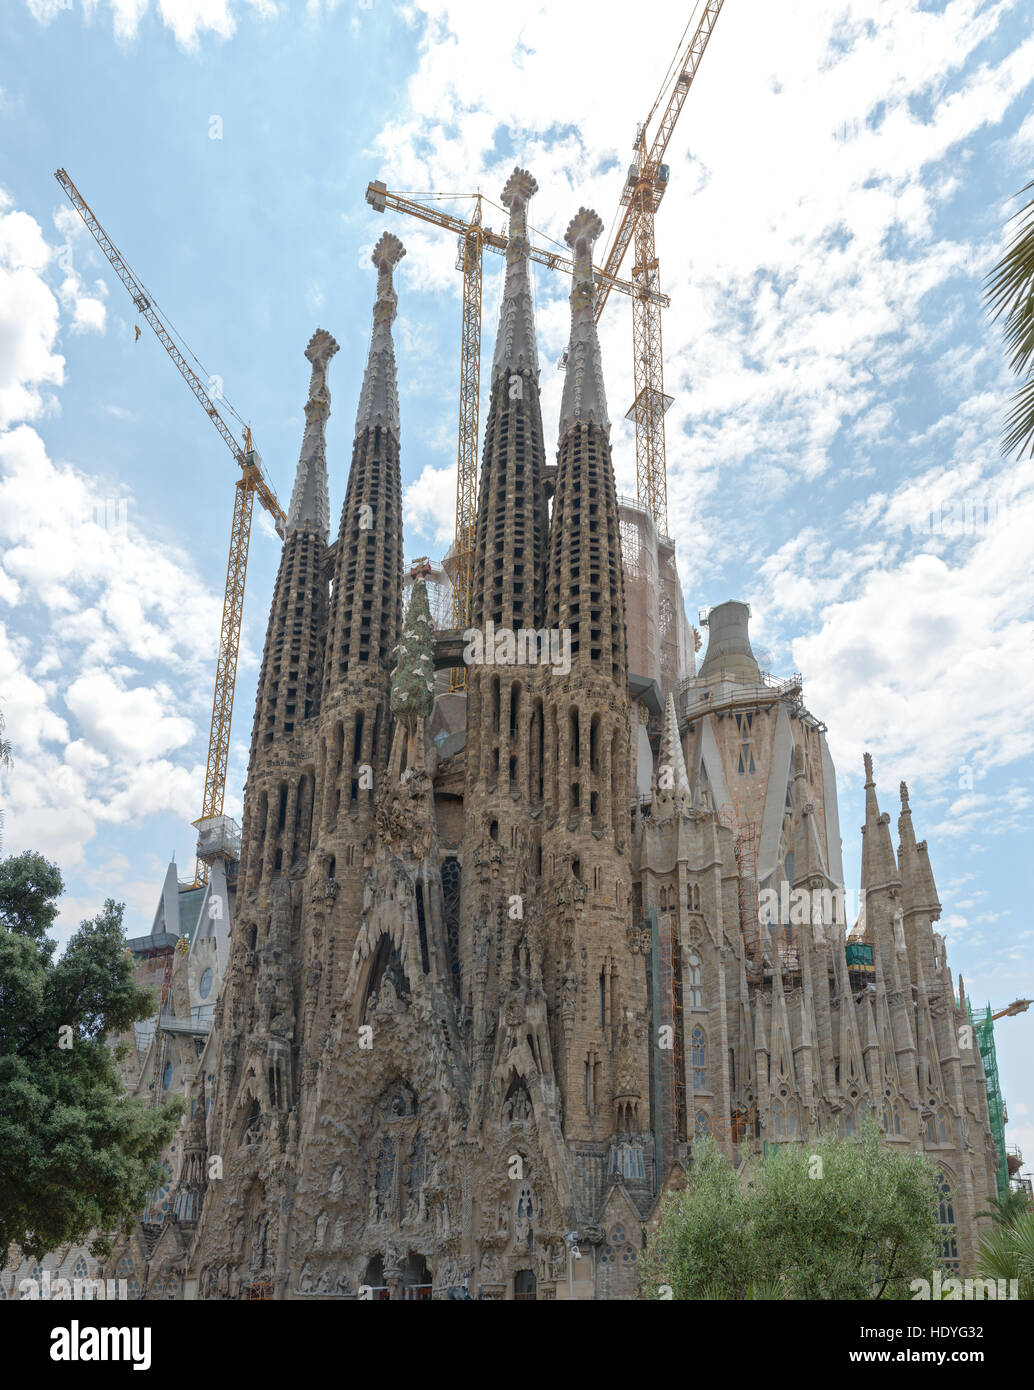 The cranes are towering over the construction site of Sagrada Familia ...